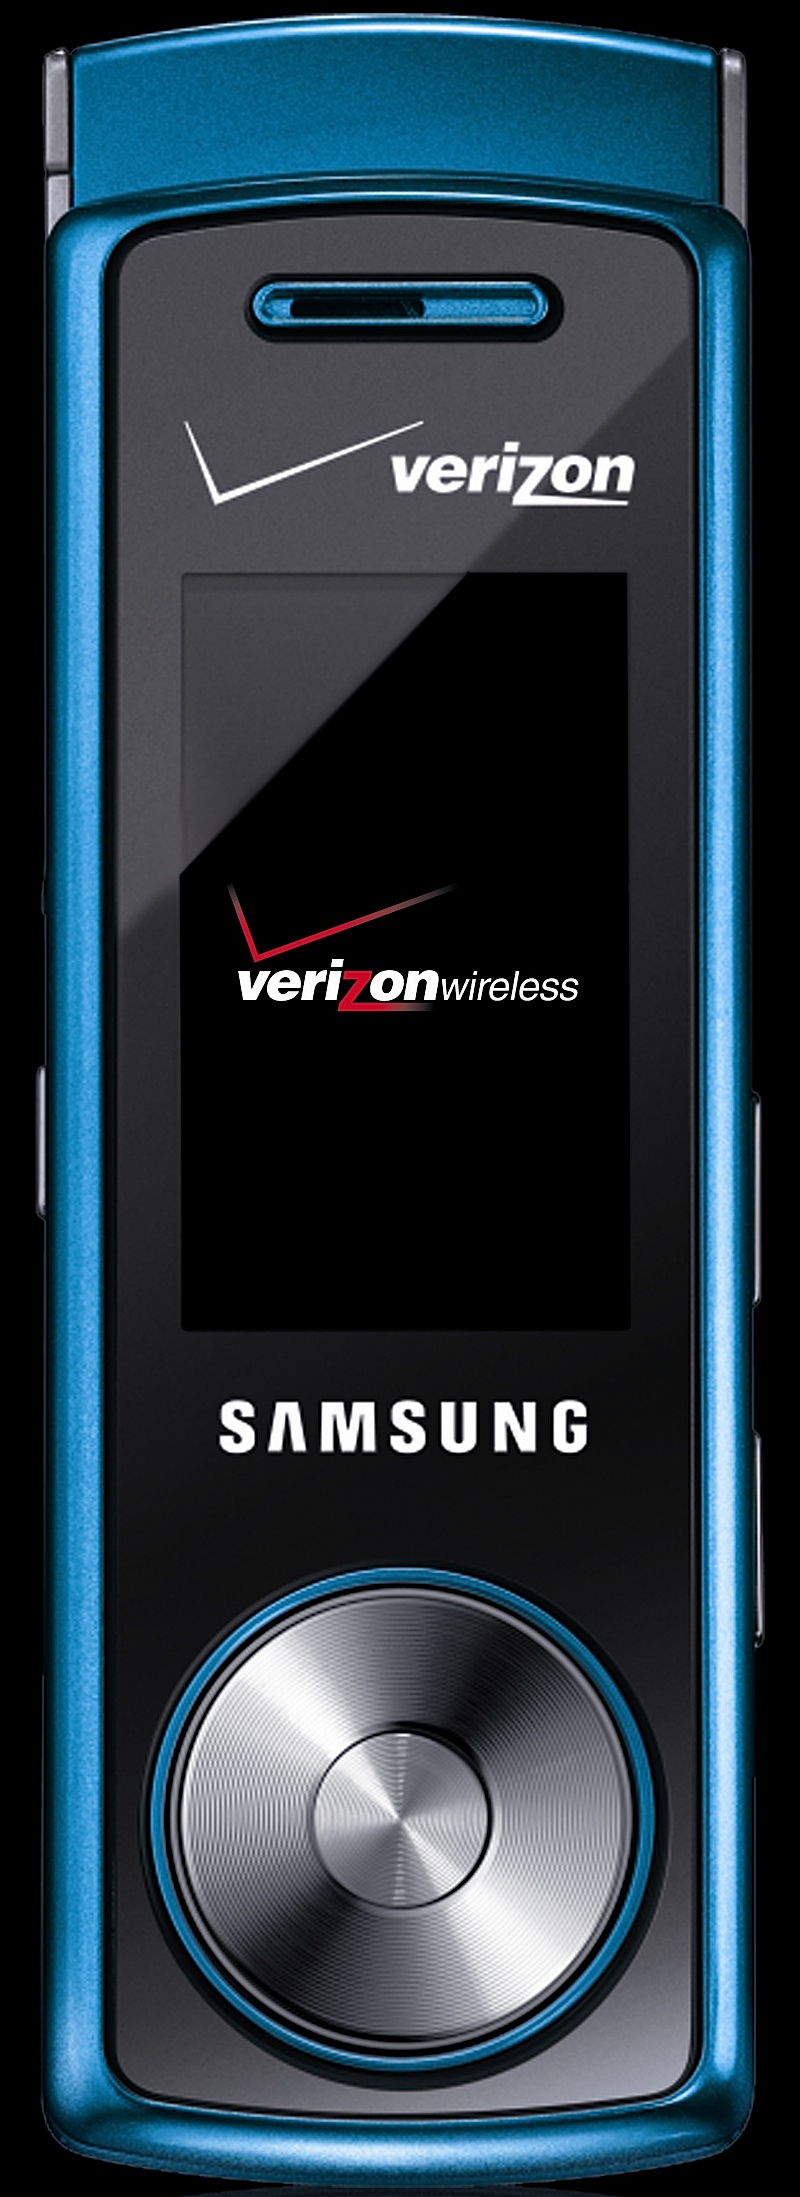 Verizon offers 4 new Trendy Phones to compete with Apple iPod and AT&T